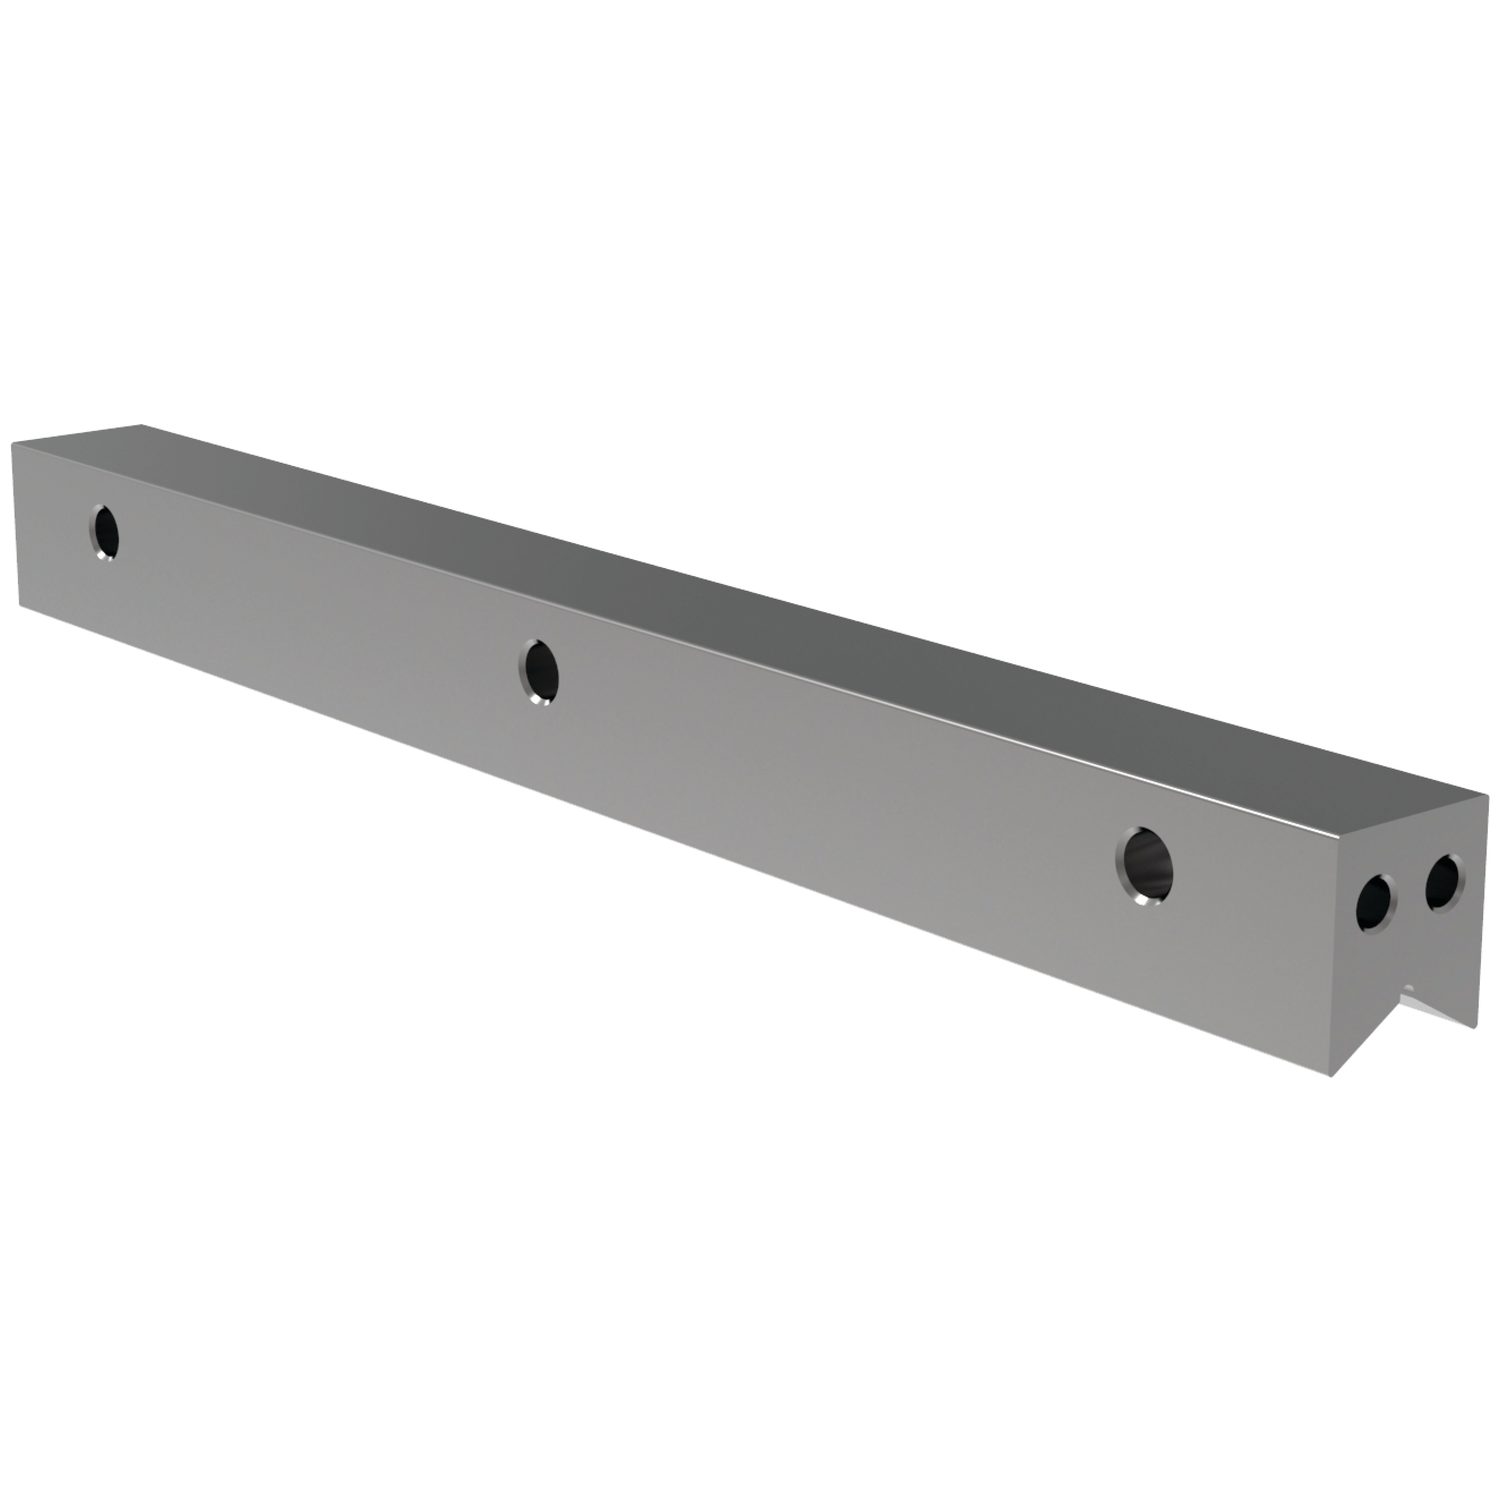 Needle Roller Rail Sets When used with the corresponding V rail, and rollers, these roller rails can provide linear motion and support heavy duty loads.